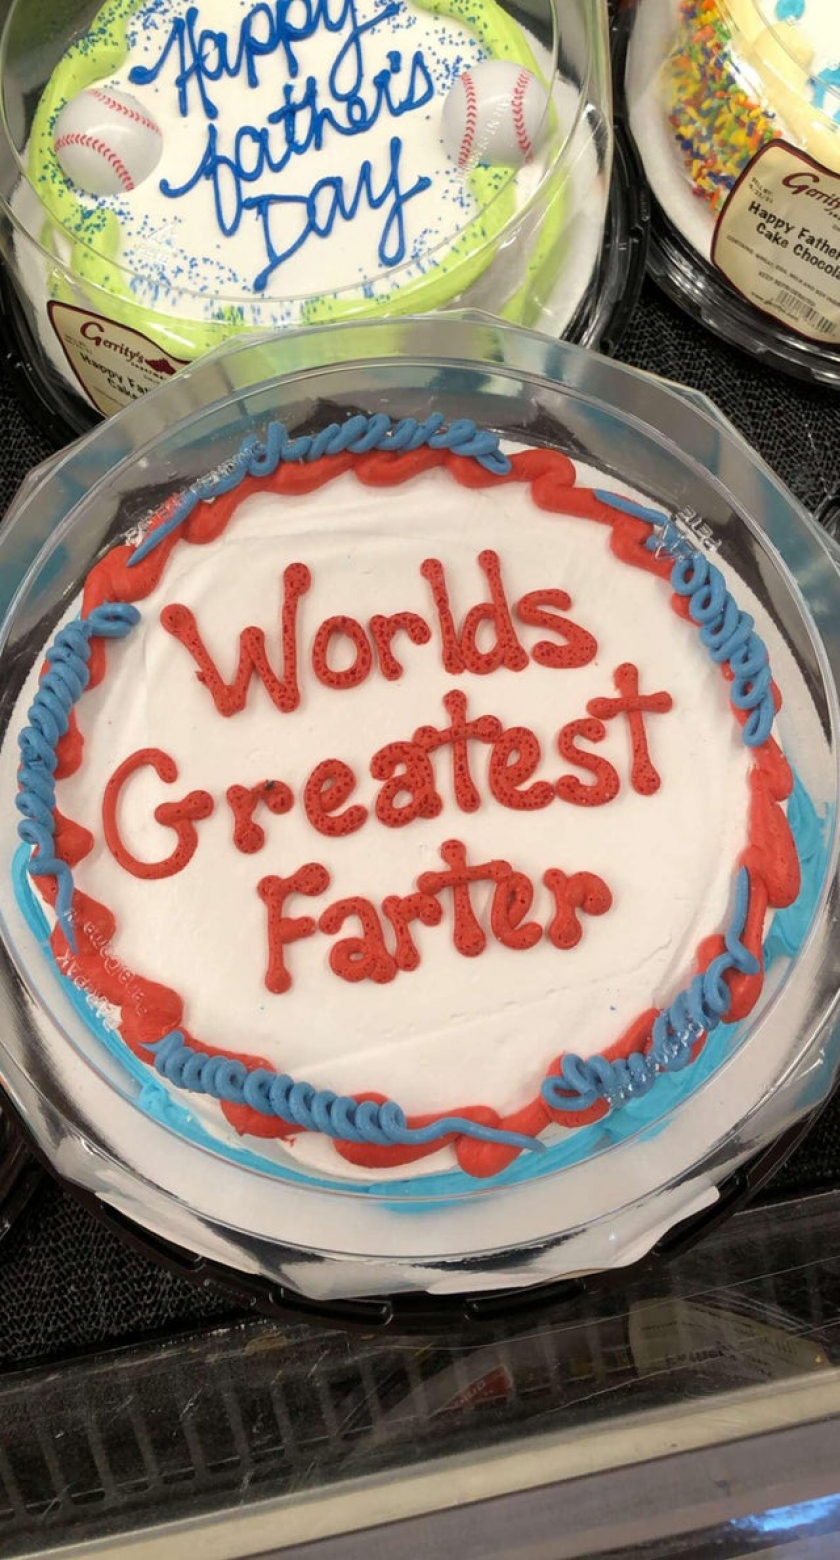 Found this cake today…